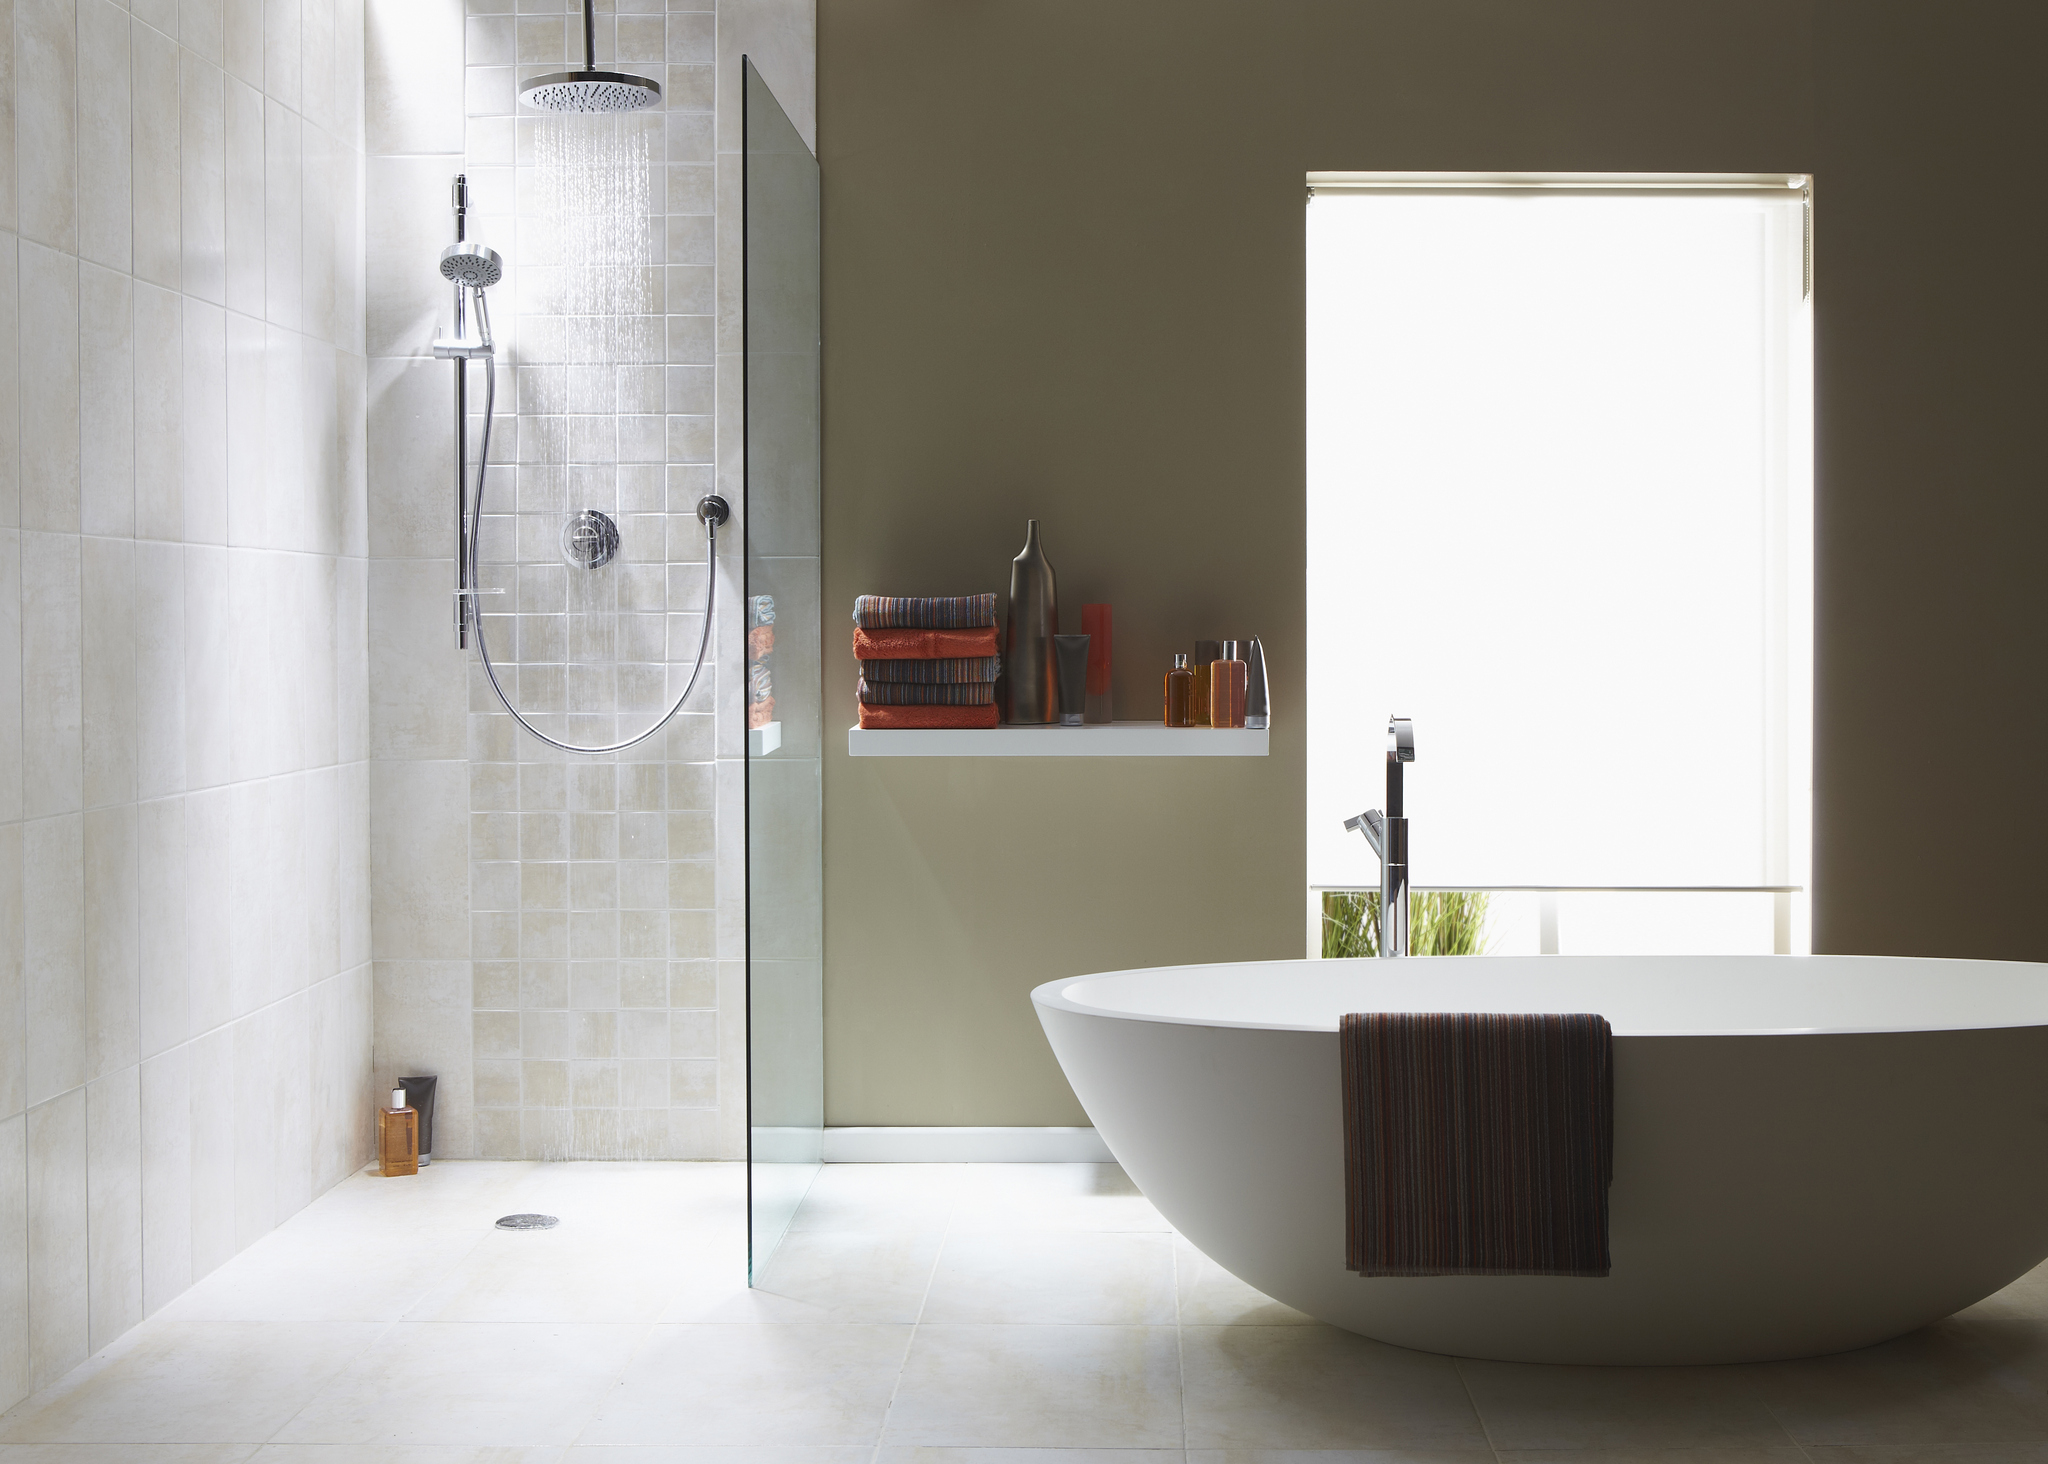 Curbless shower and modern standing bathtub